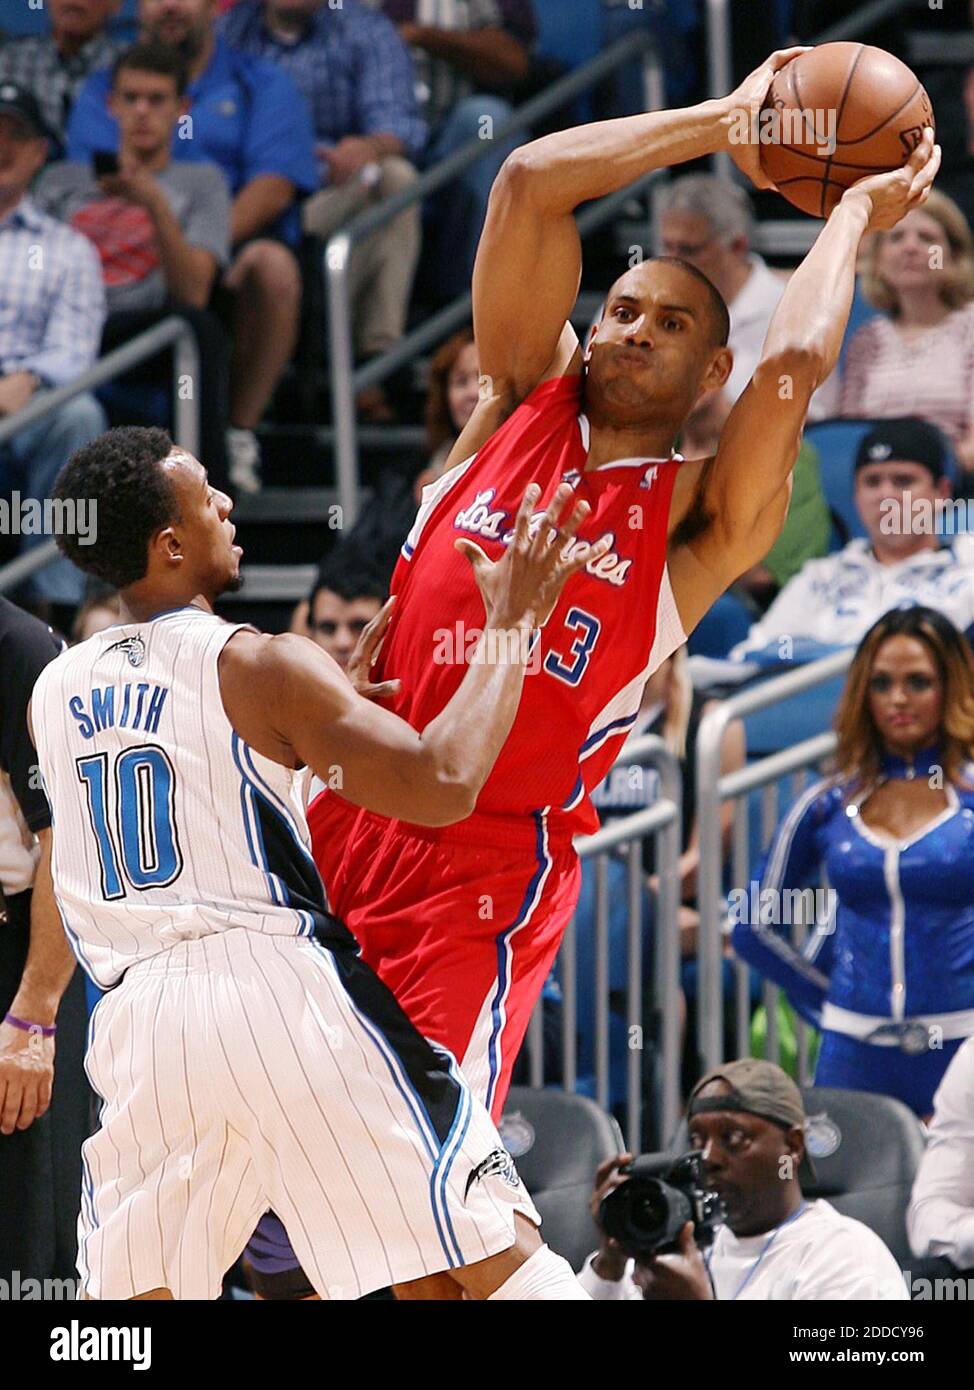 Grant Hill of the Los Angeles Clippers, front, challenges a player